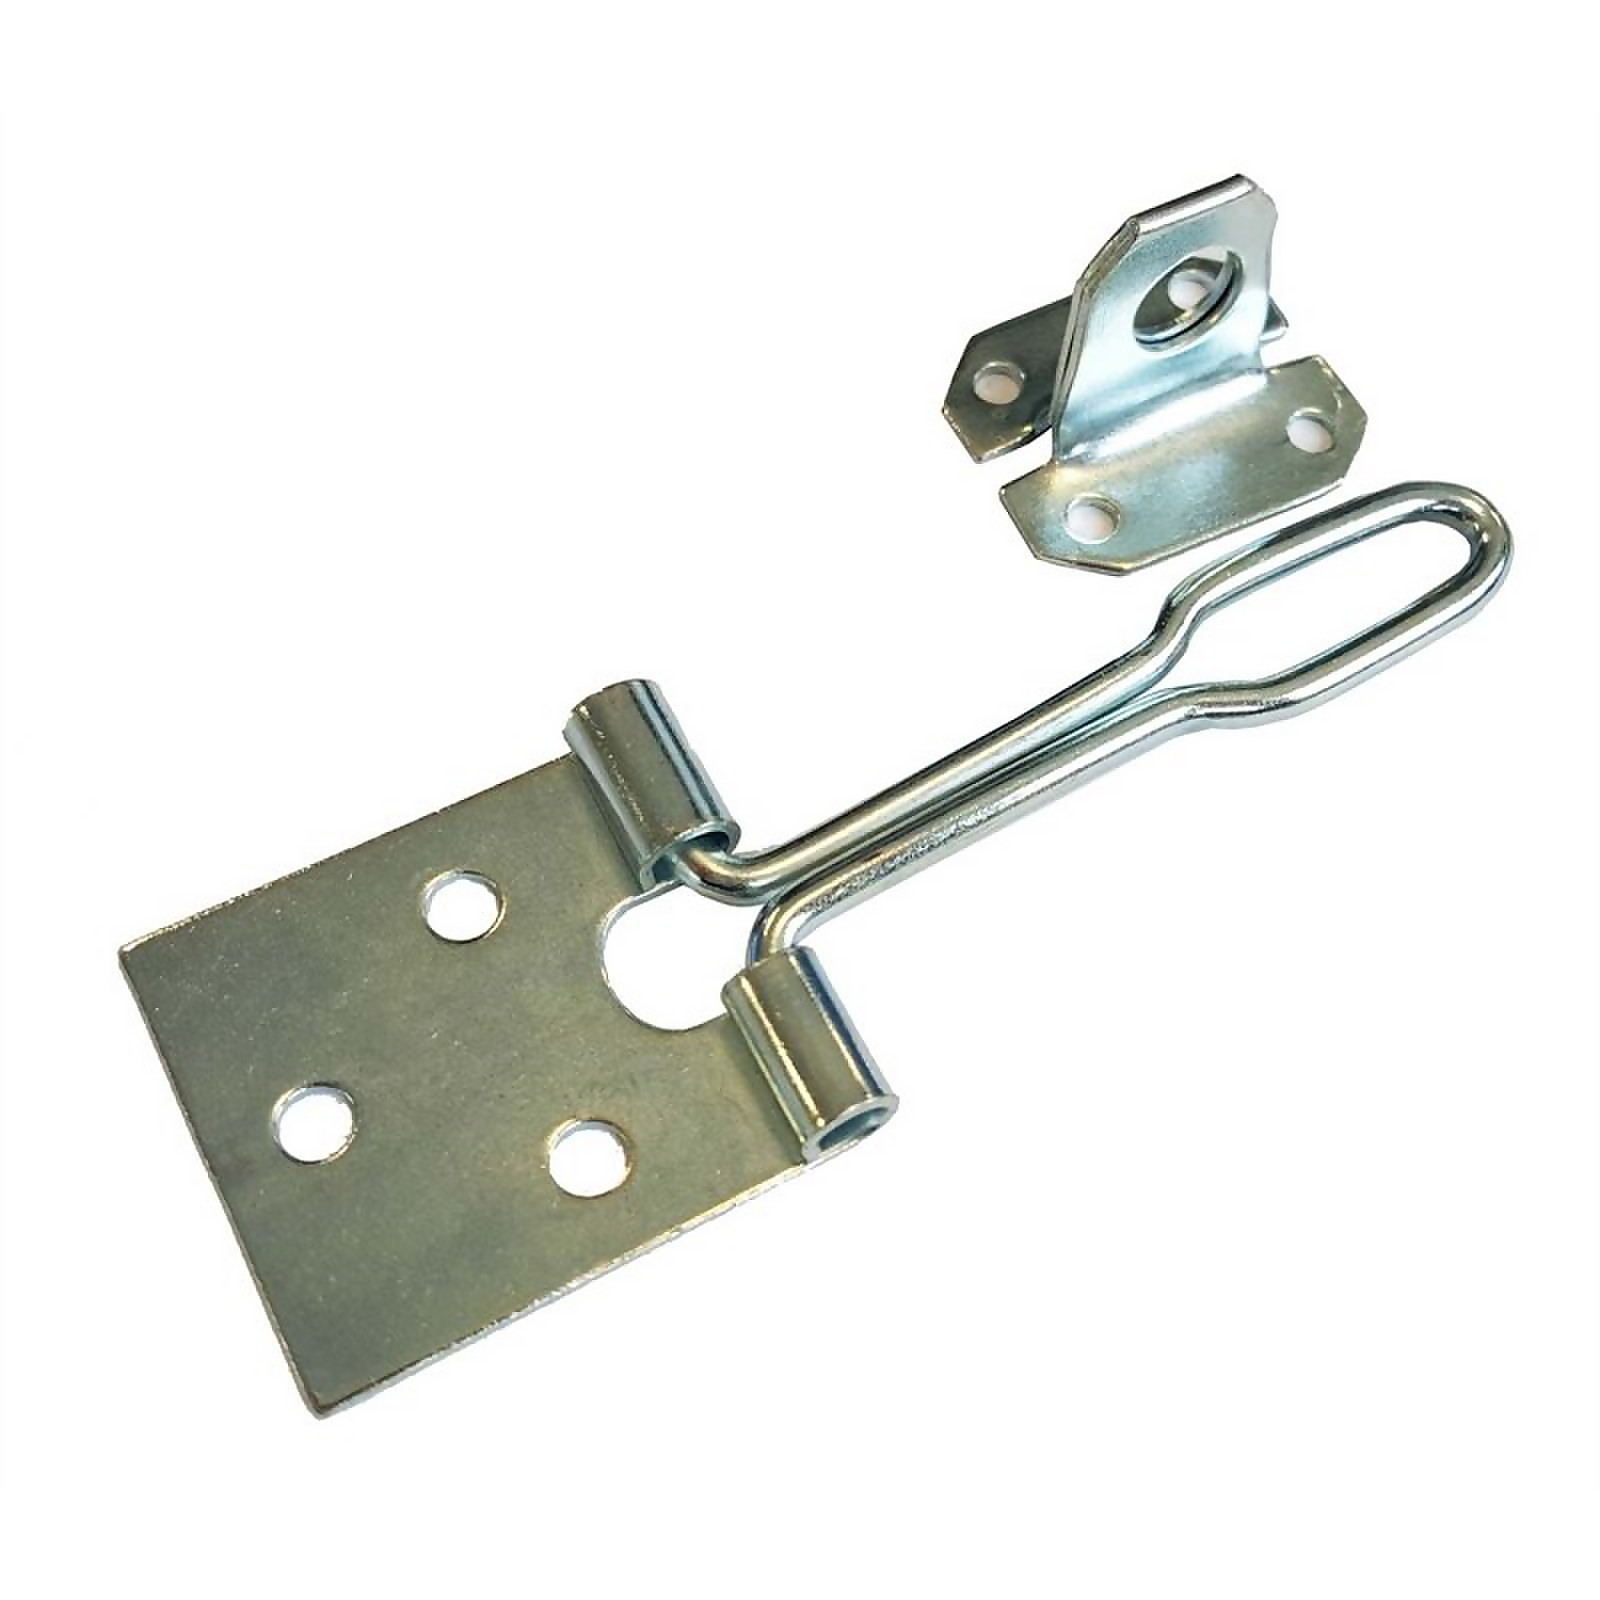 Photo of Wire Hasp & Staple - Zinc Plated - 102mm